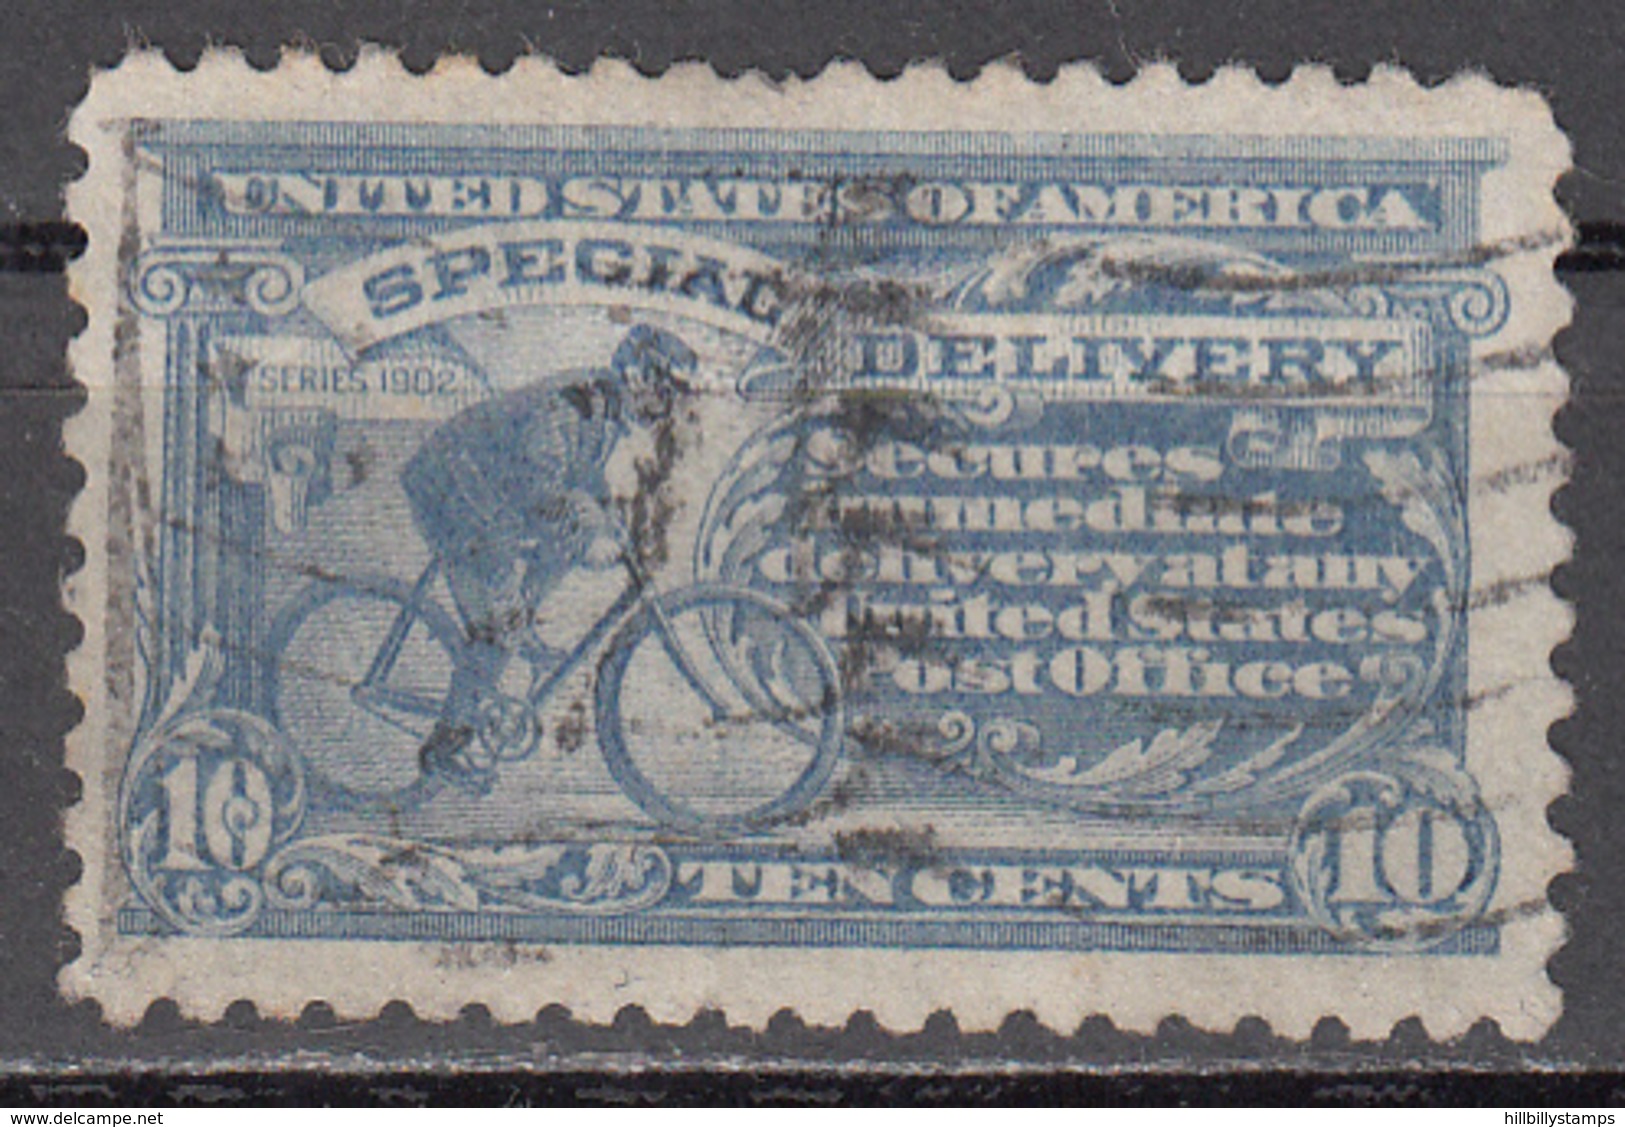 UNITED STATES     SCOTT NO. E10    USED      YEAR  1916    UNWMKD  PERF 10 - Special Delivery, Registration & Certified